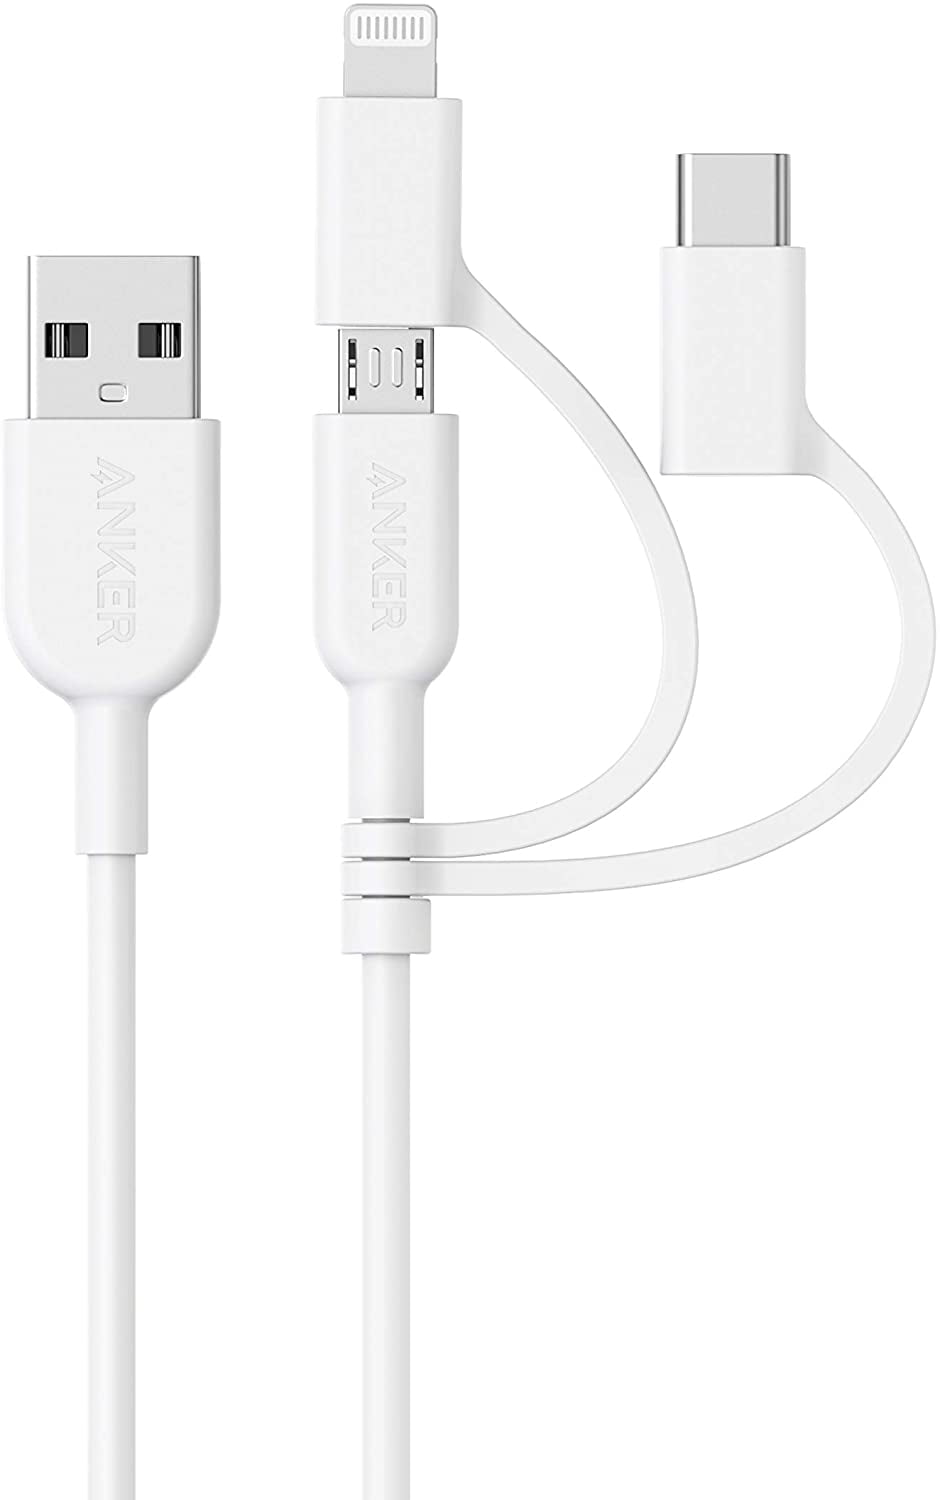 Anker Powerline II 3-in-1 Cable, Lightning/Type C/Micro USB Cable, 3ft ...